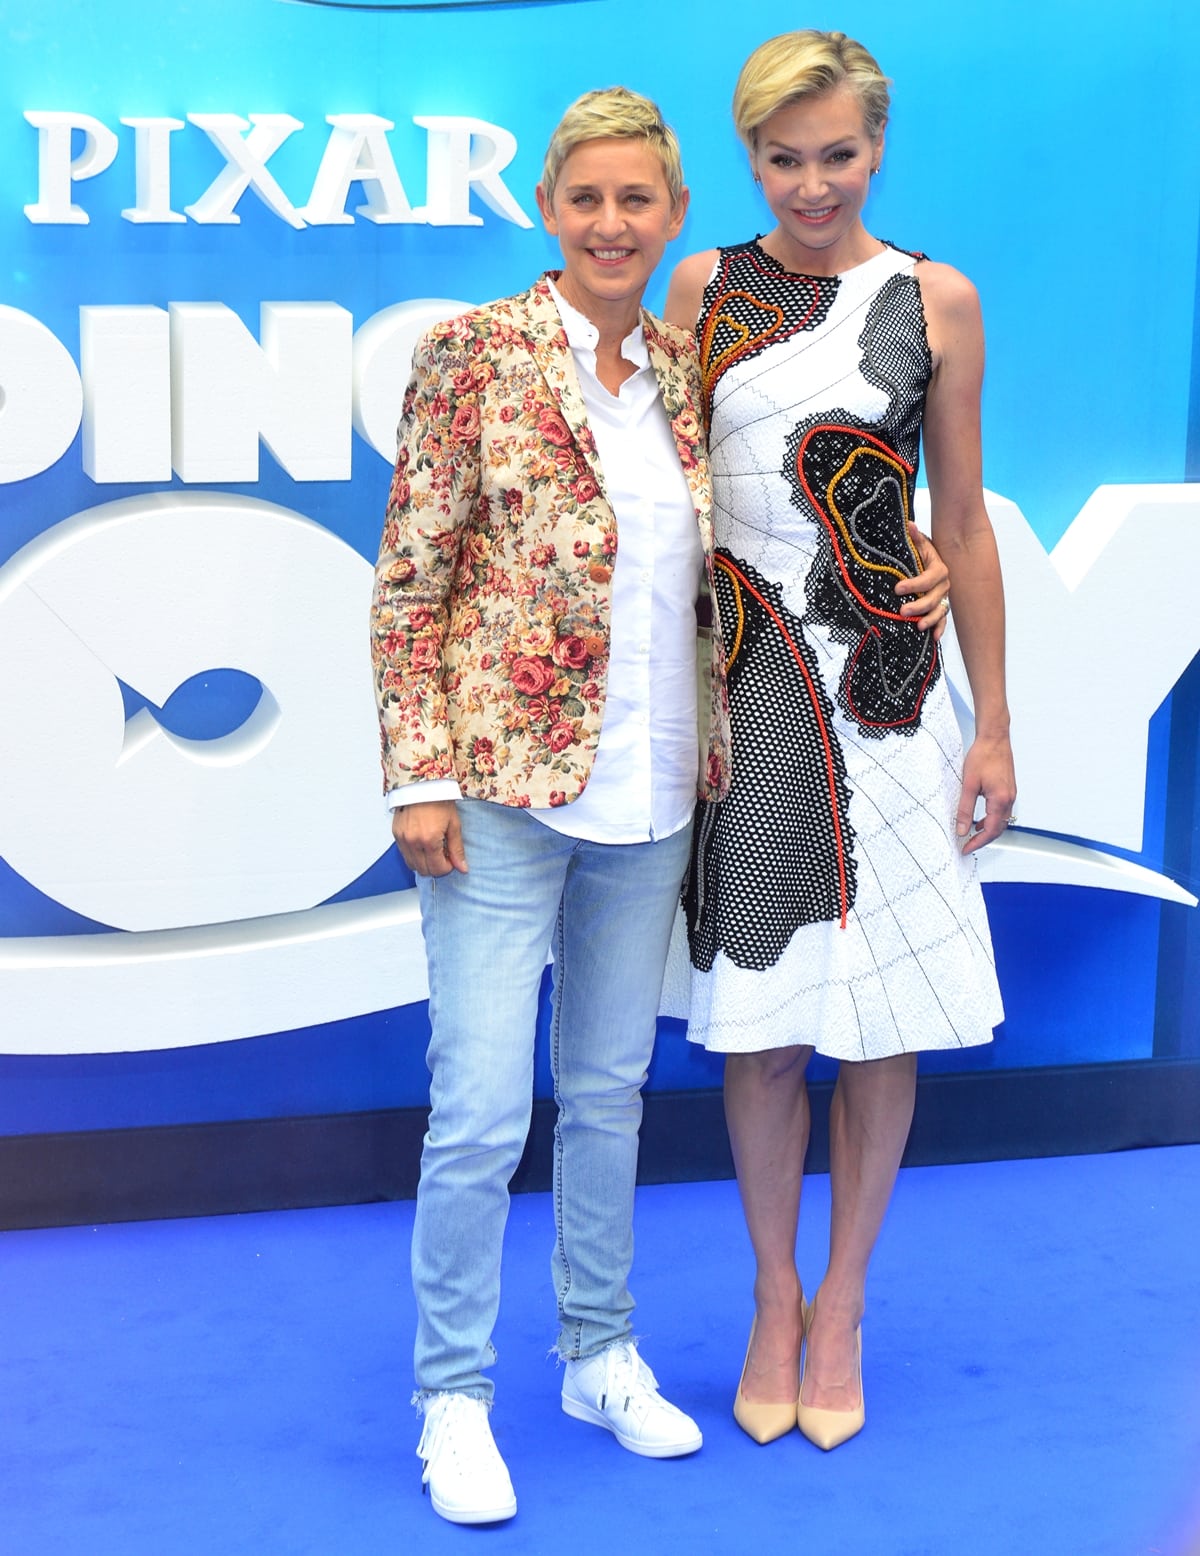 Ellen DeGeneres and her wife Portia de Rossi pose for photos at the Finding Dory premiere